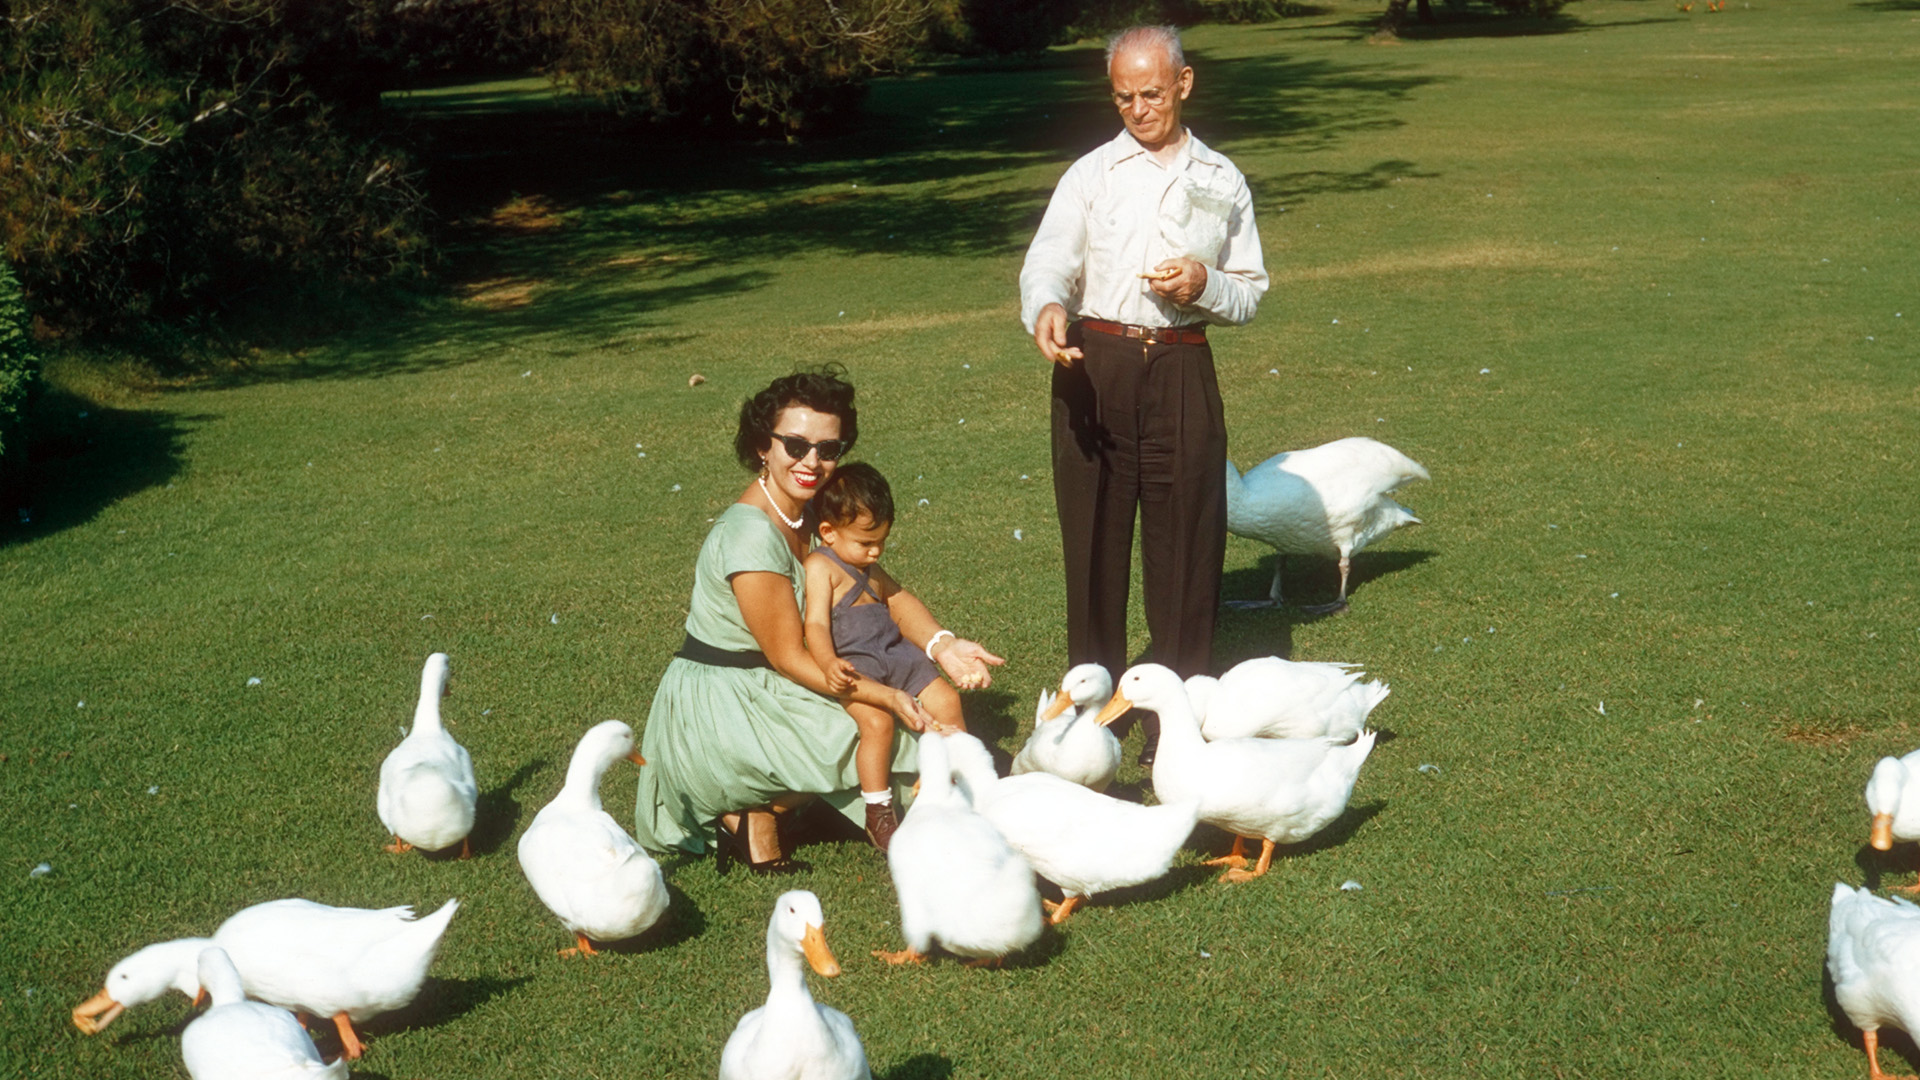 Mother, child, and grandfather on green, green grass and surrounded by white geese